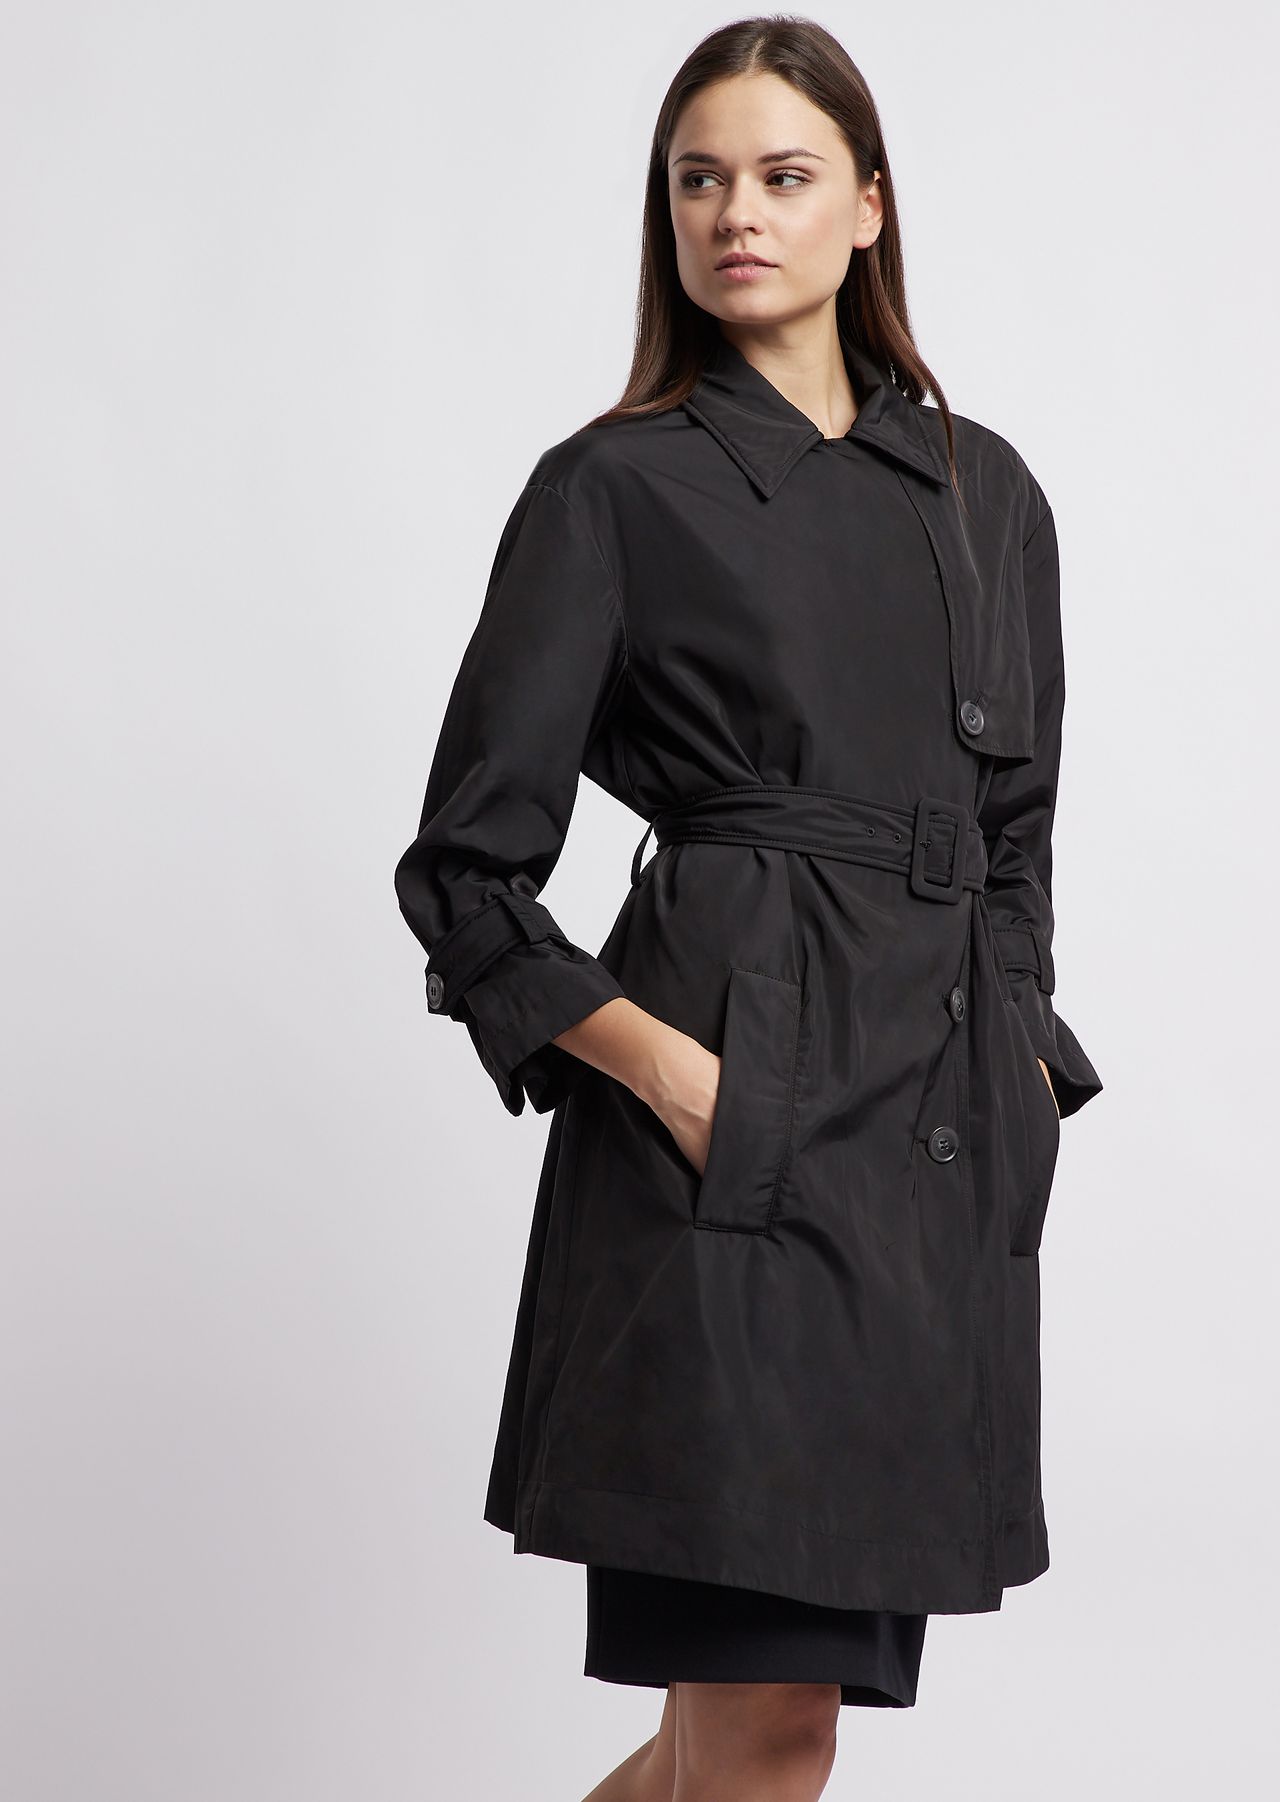 Double poly taffetà trench coat with belt | Woman | Emporio Armani